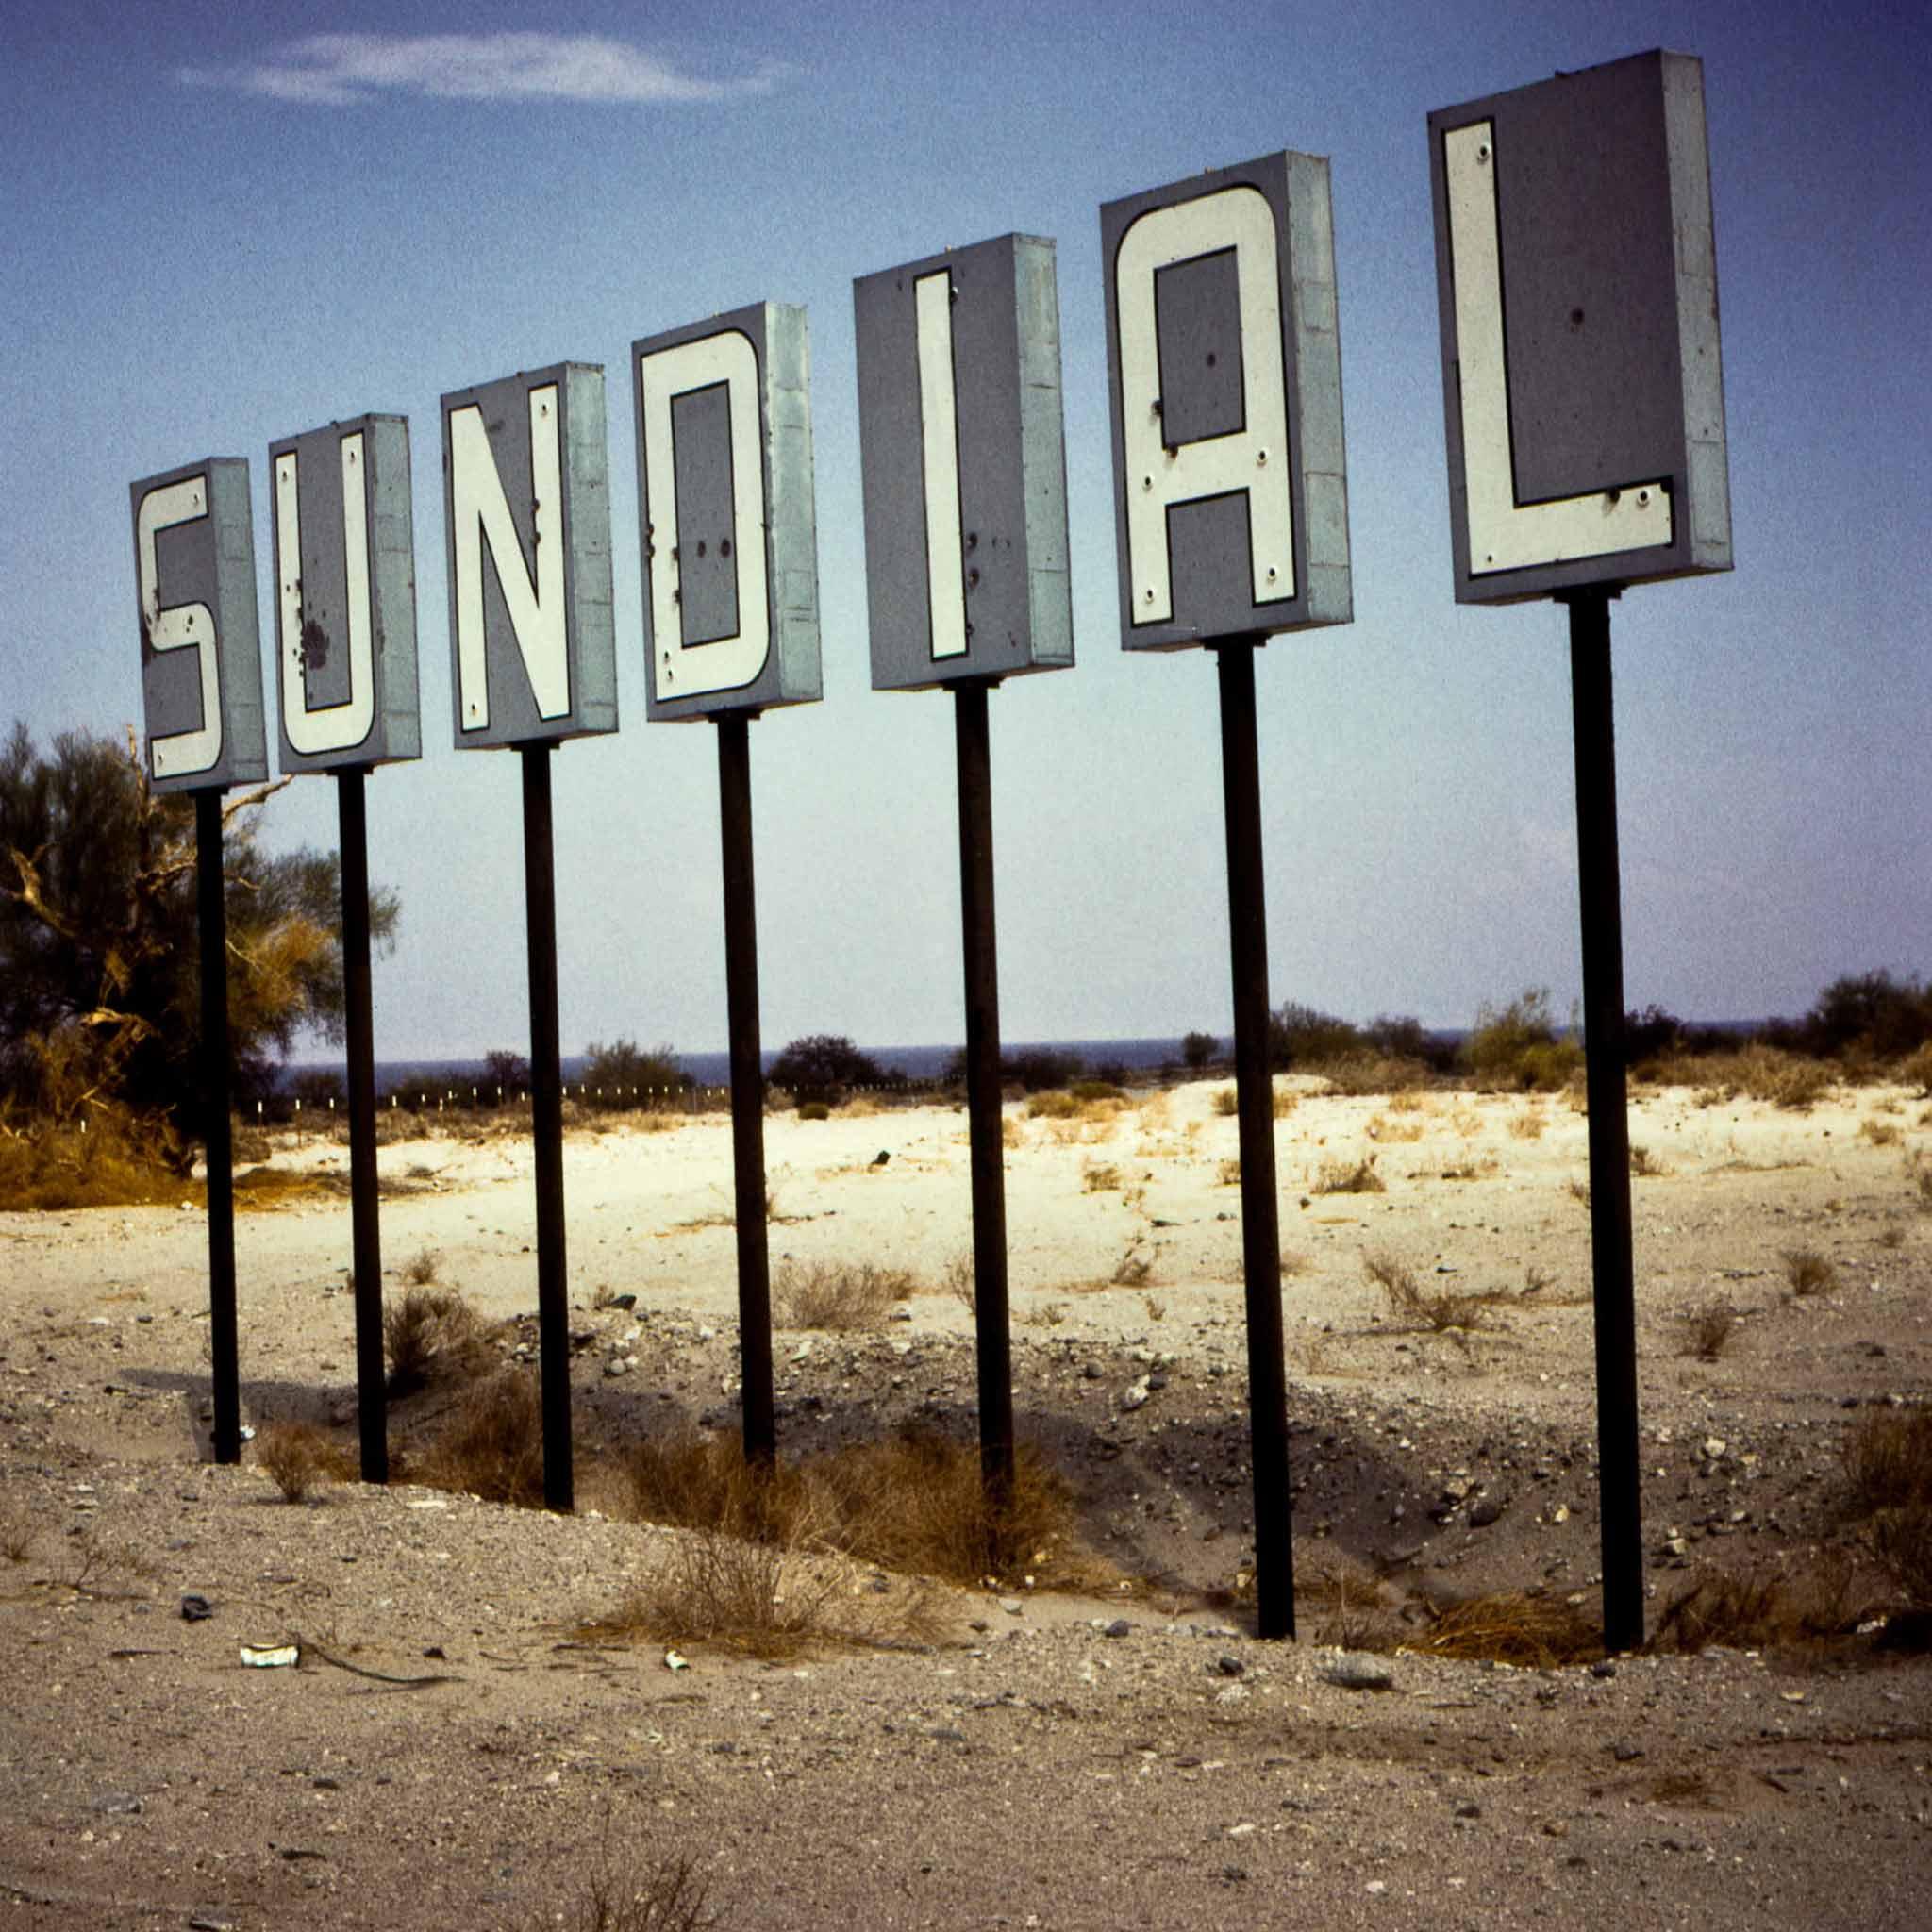 a sign in the desert that says "Sundial"